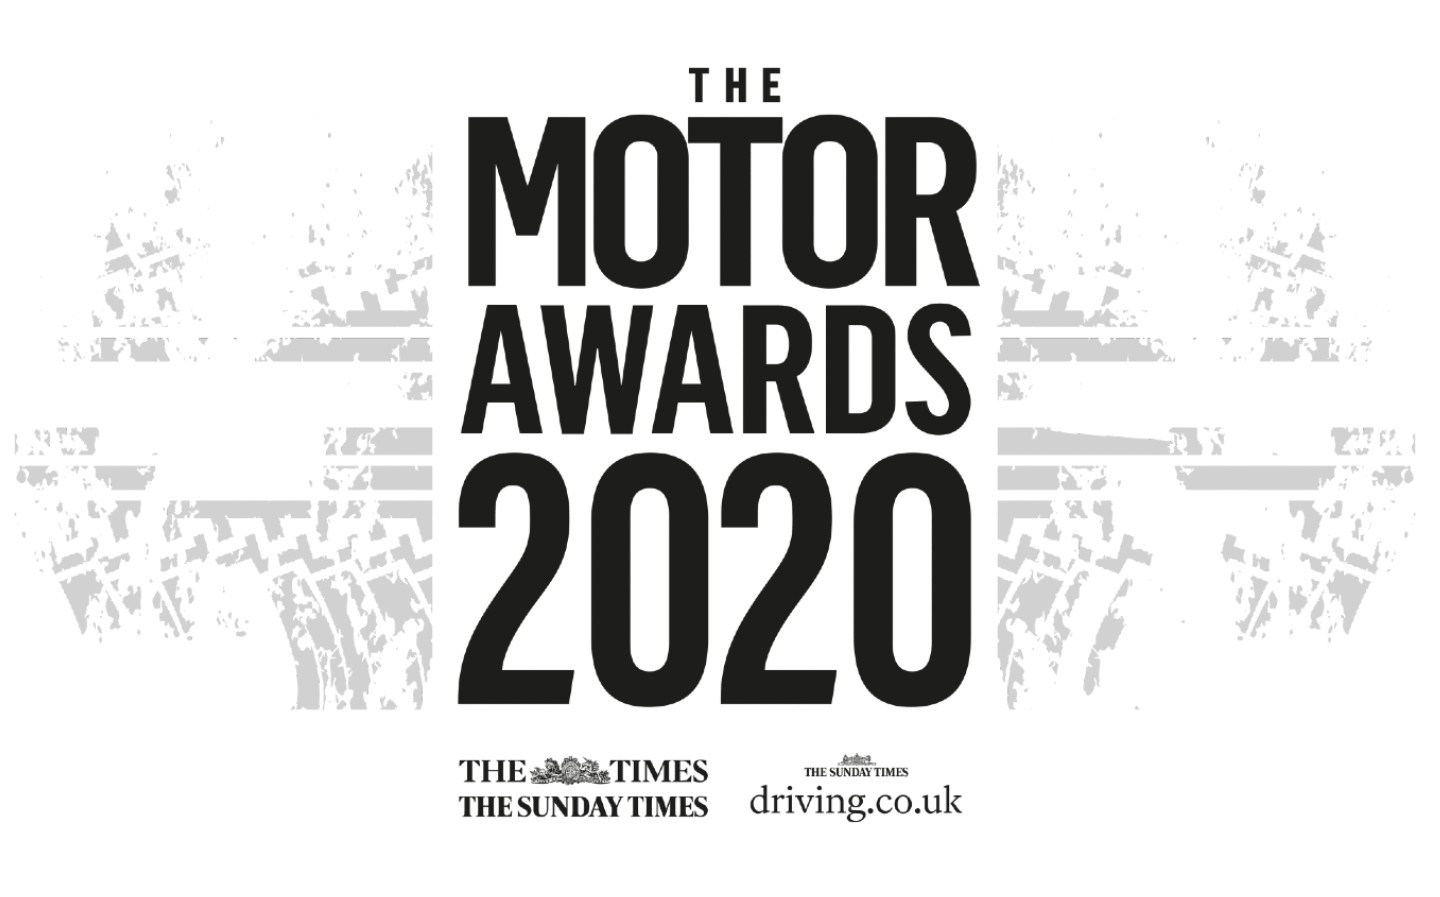 Motor Awards 2020: Sunday Times cars of the year shortlist announced